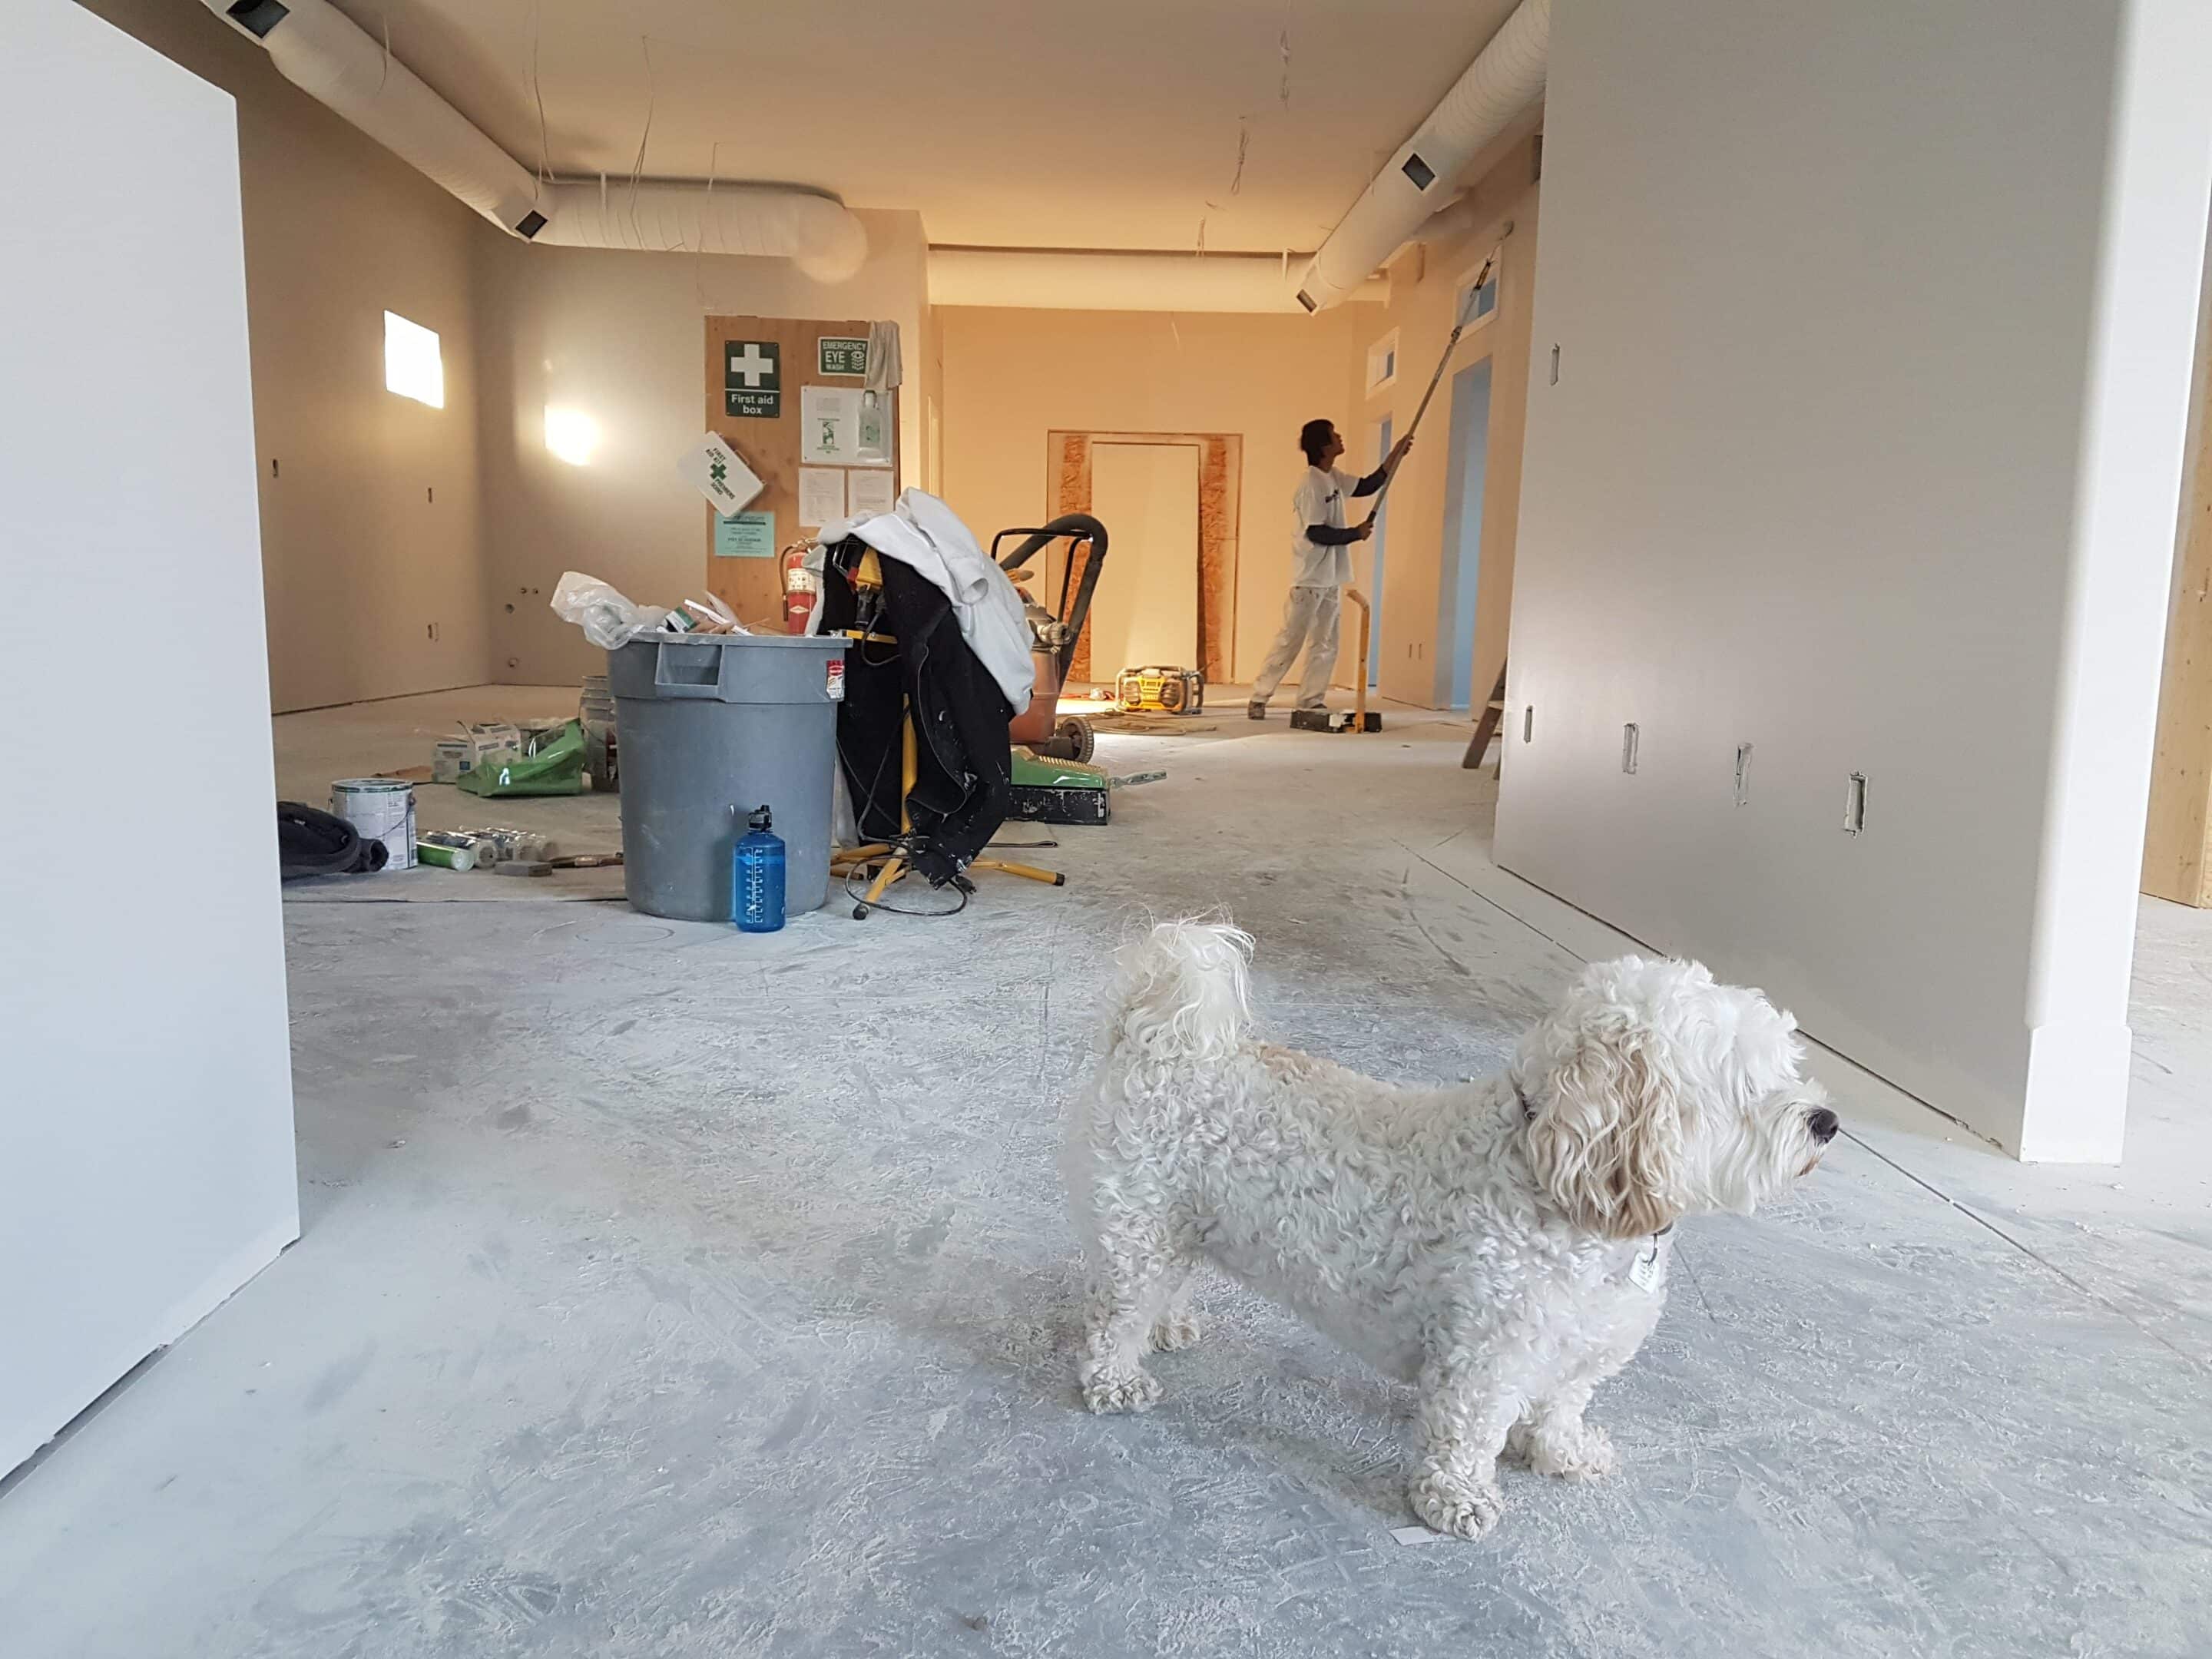 Creating a pet-friendly environment: a pet business owner decorating their business space accompanied by a small bichon frise